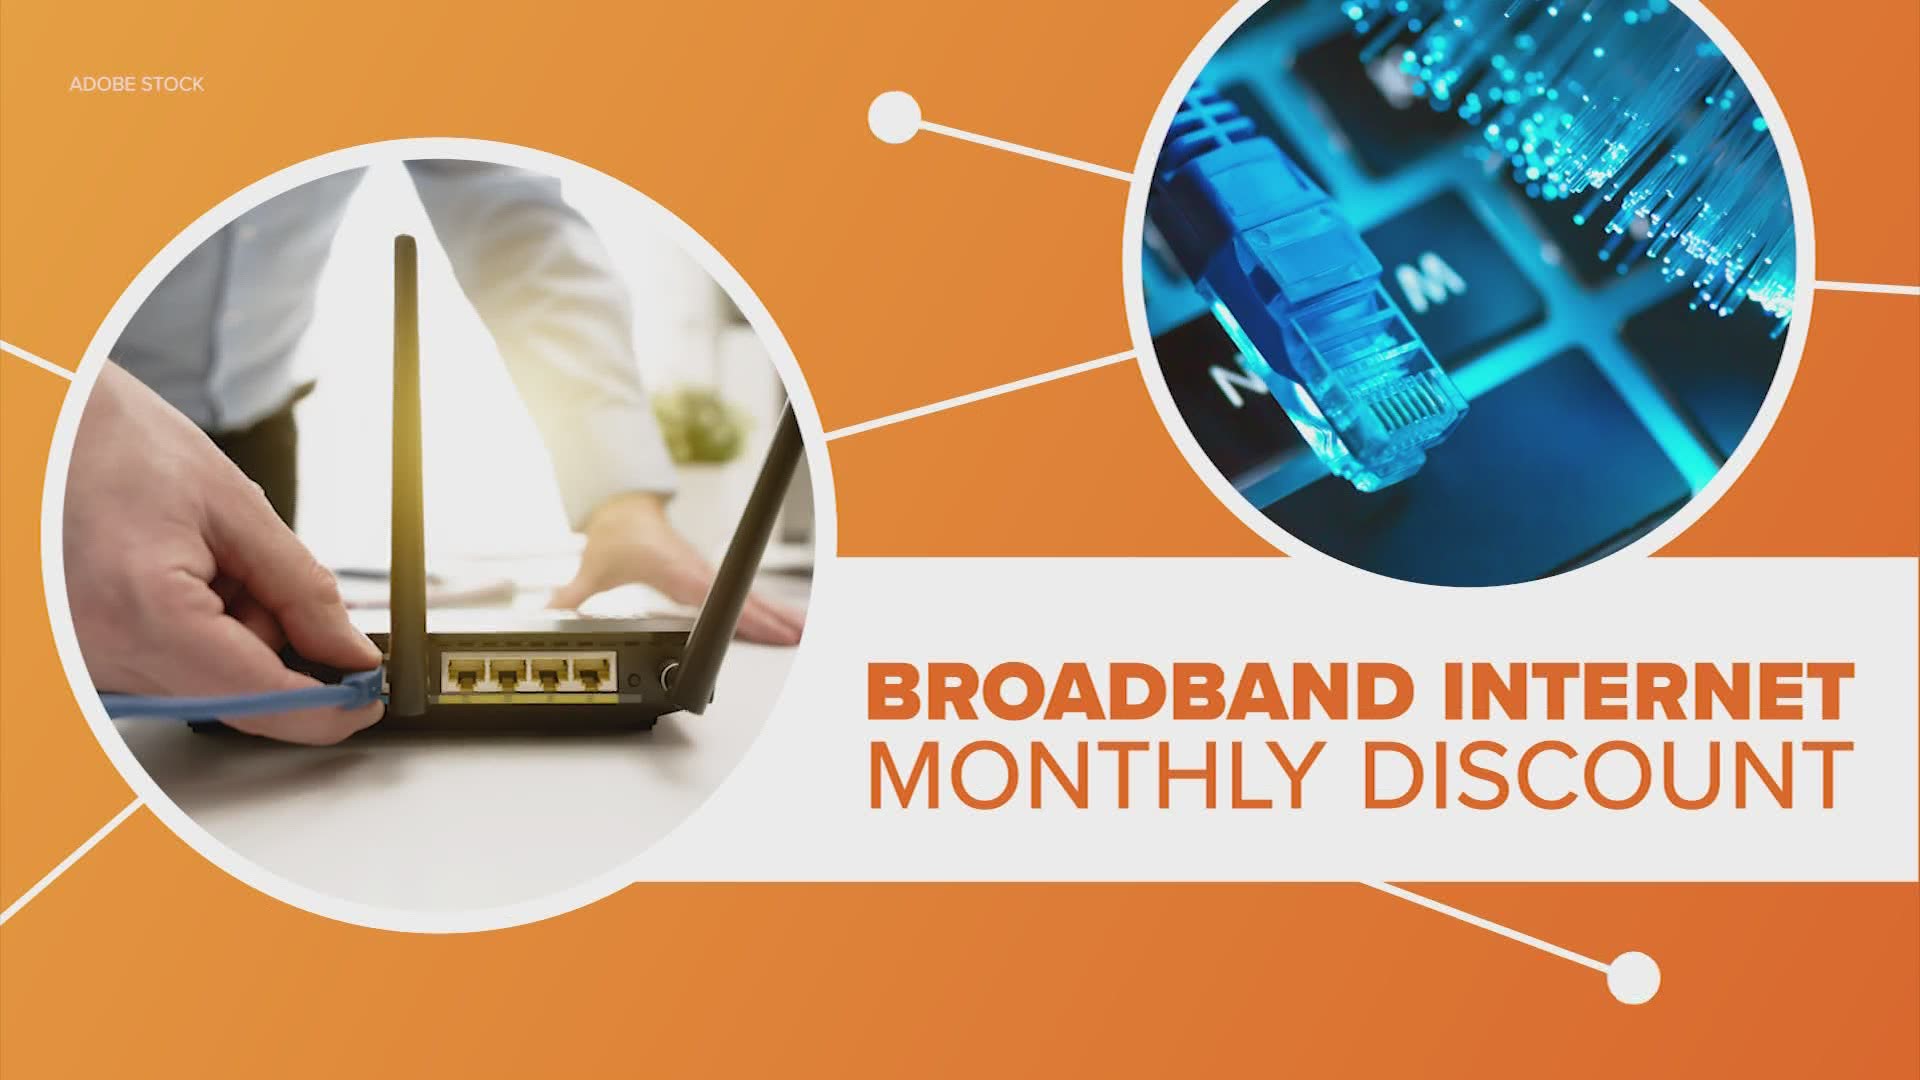 Starting next week, you can sign up for a big discount on your internet bill.